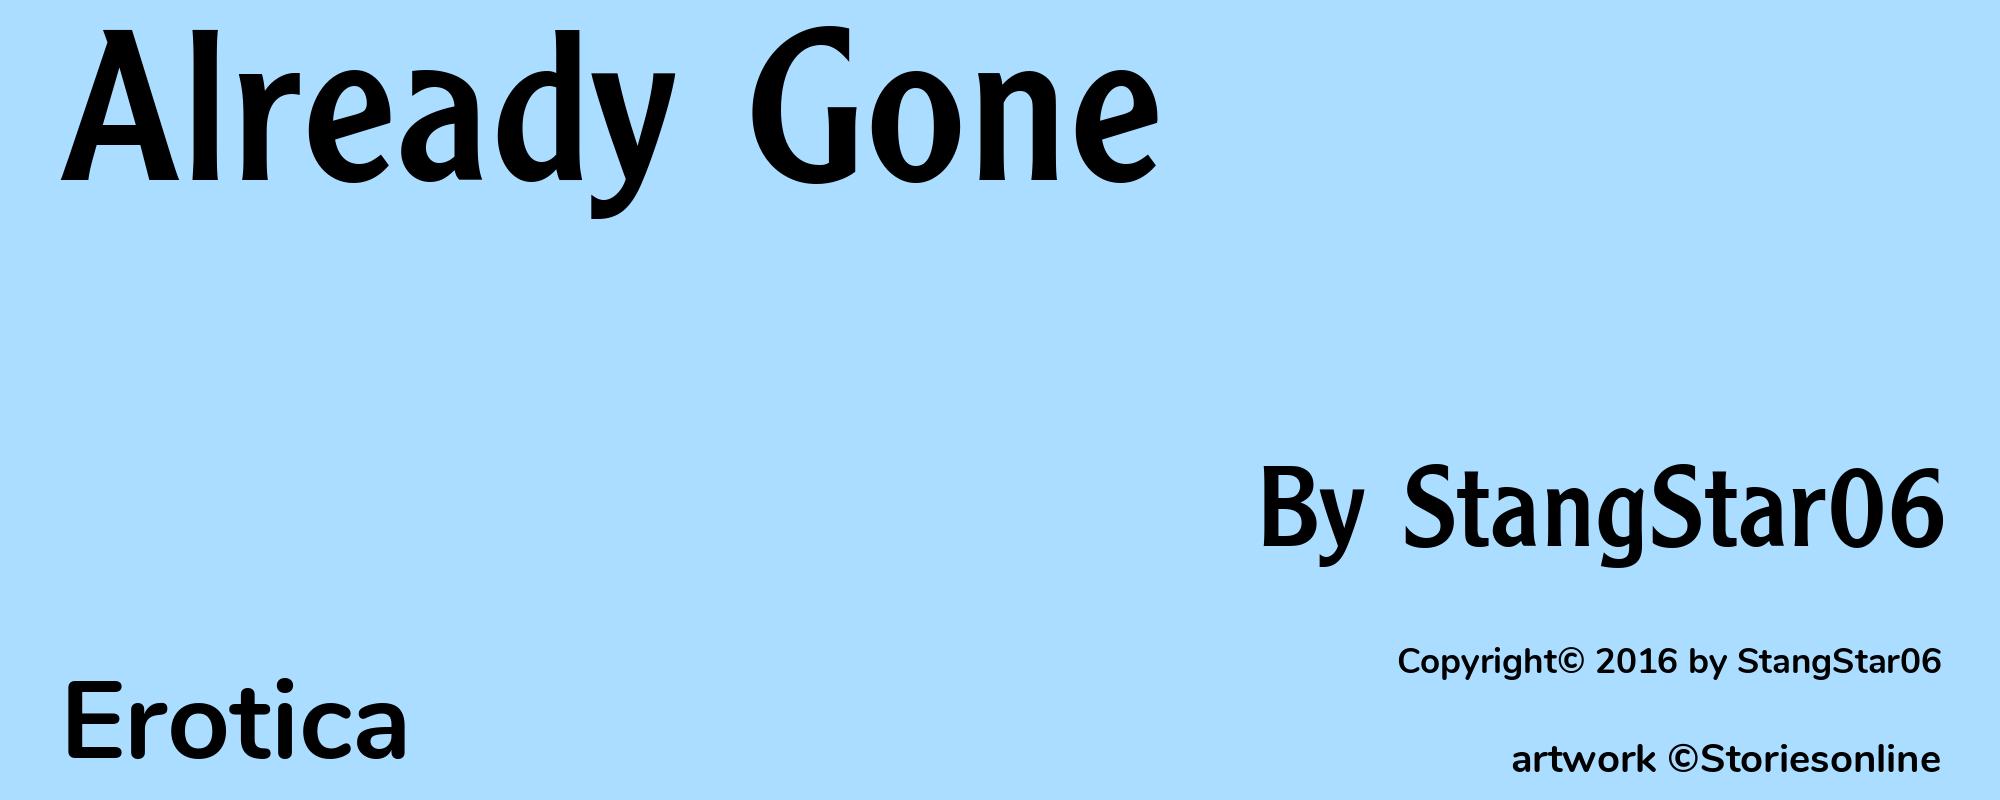 Already Gone - Cover